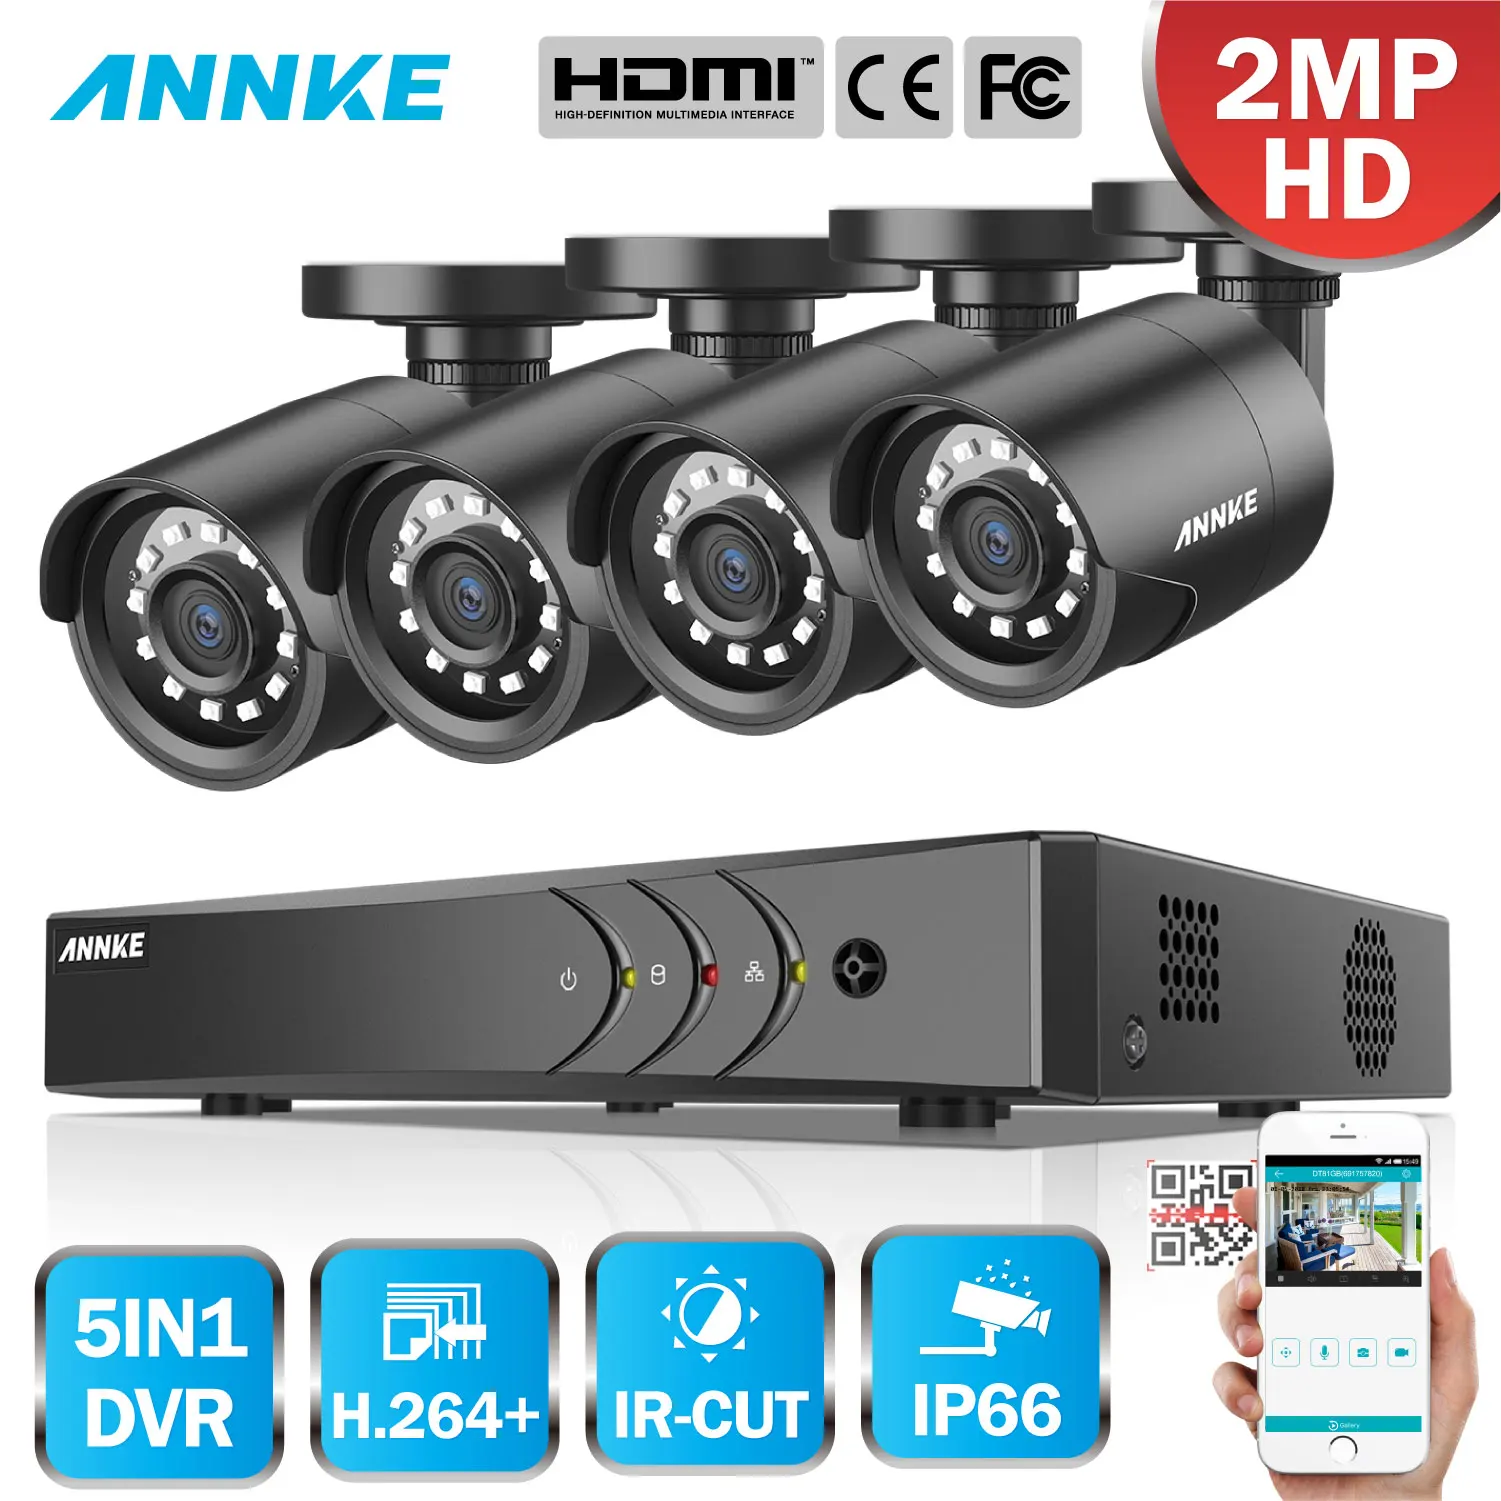 ANNKE 8CH HD 1080P Video Security System Lite H.264+ 5in1 DVR With 4PCS 2MP TVI Bullet Weatherproof Outdoor Camera Home CCTV Kit |